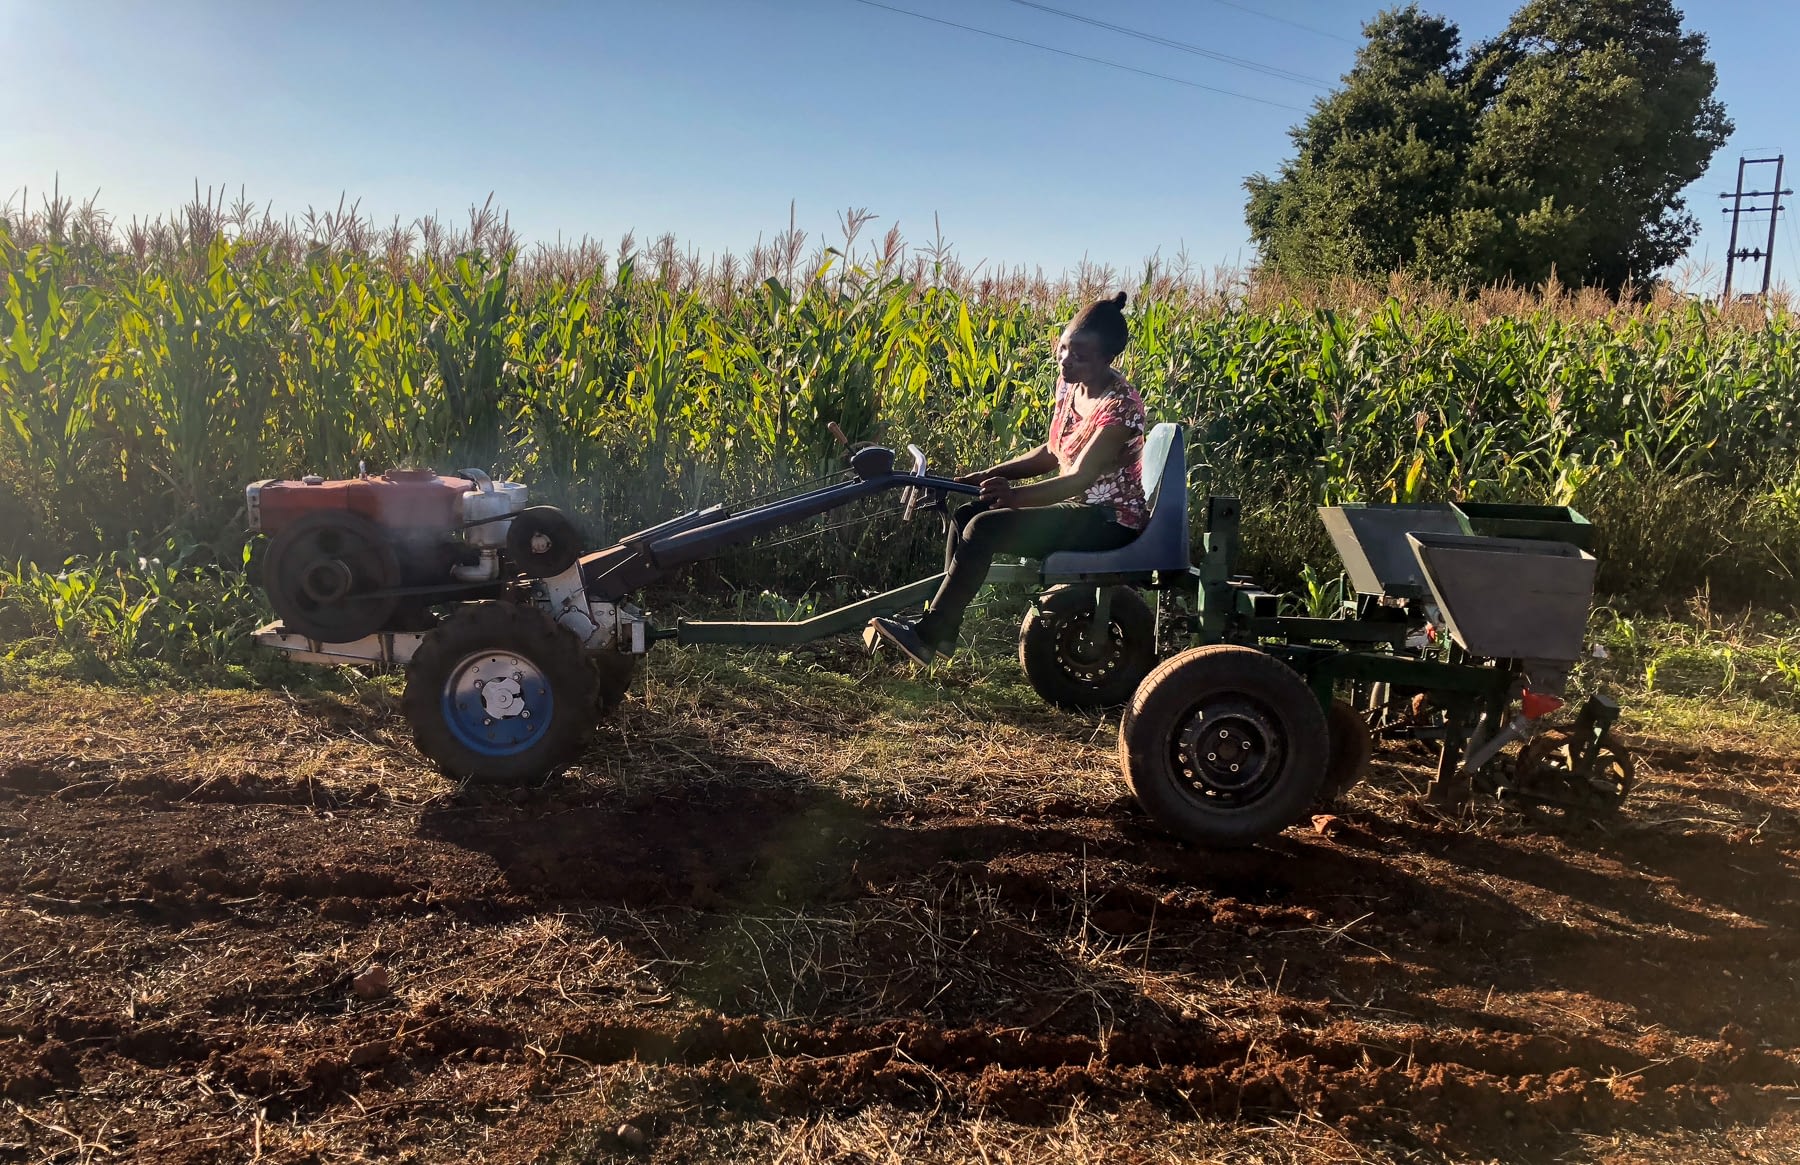 With support from CIMMYT, students at the University of Zimbabwe are working to develop agricultural machinery fitted to the environmental conditions and needs of farmers in their country and other parts of Africa. (Photo: Matthew O’Leary/CIMMYT)